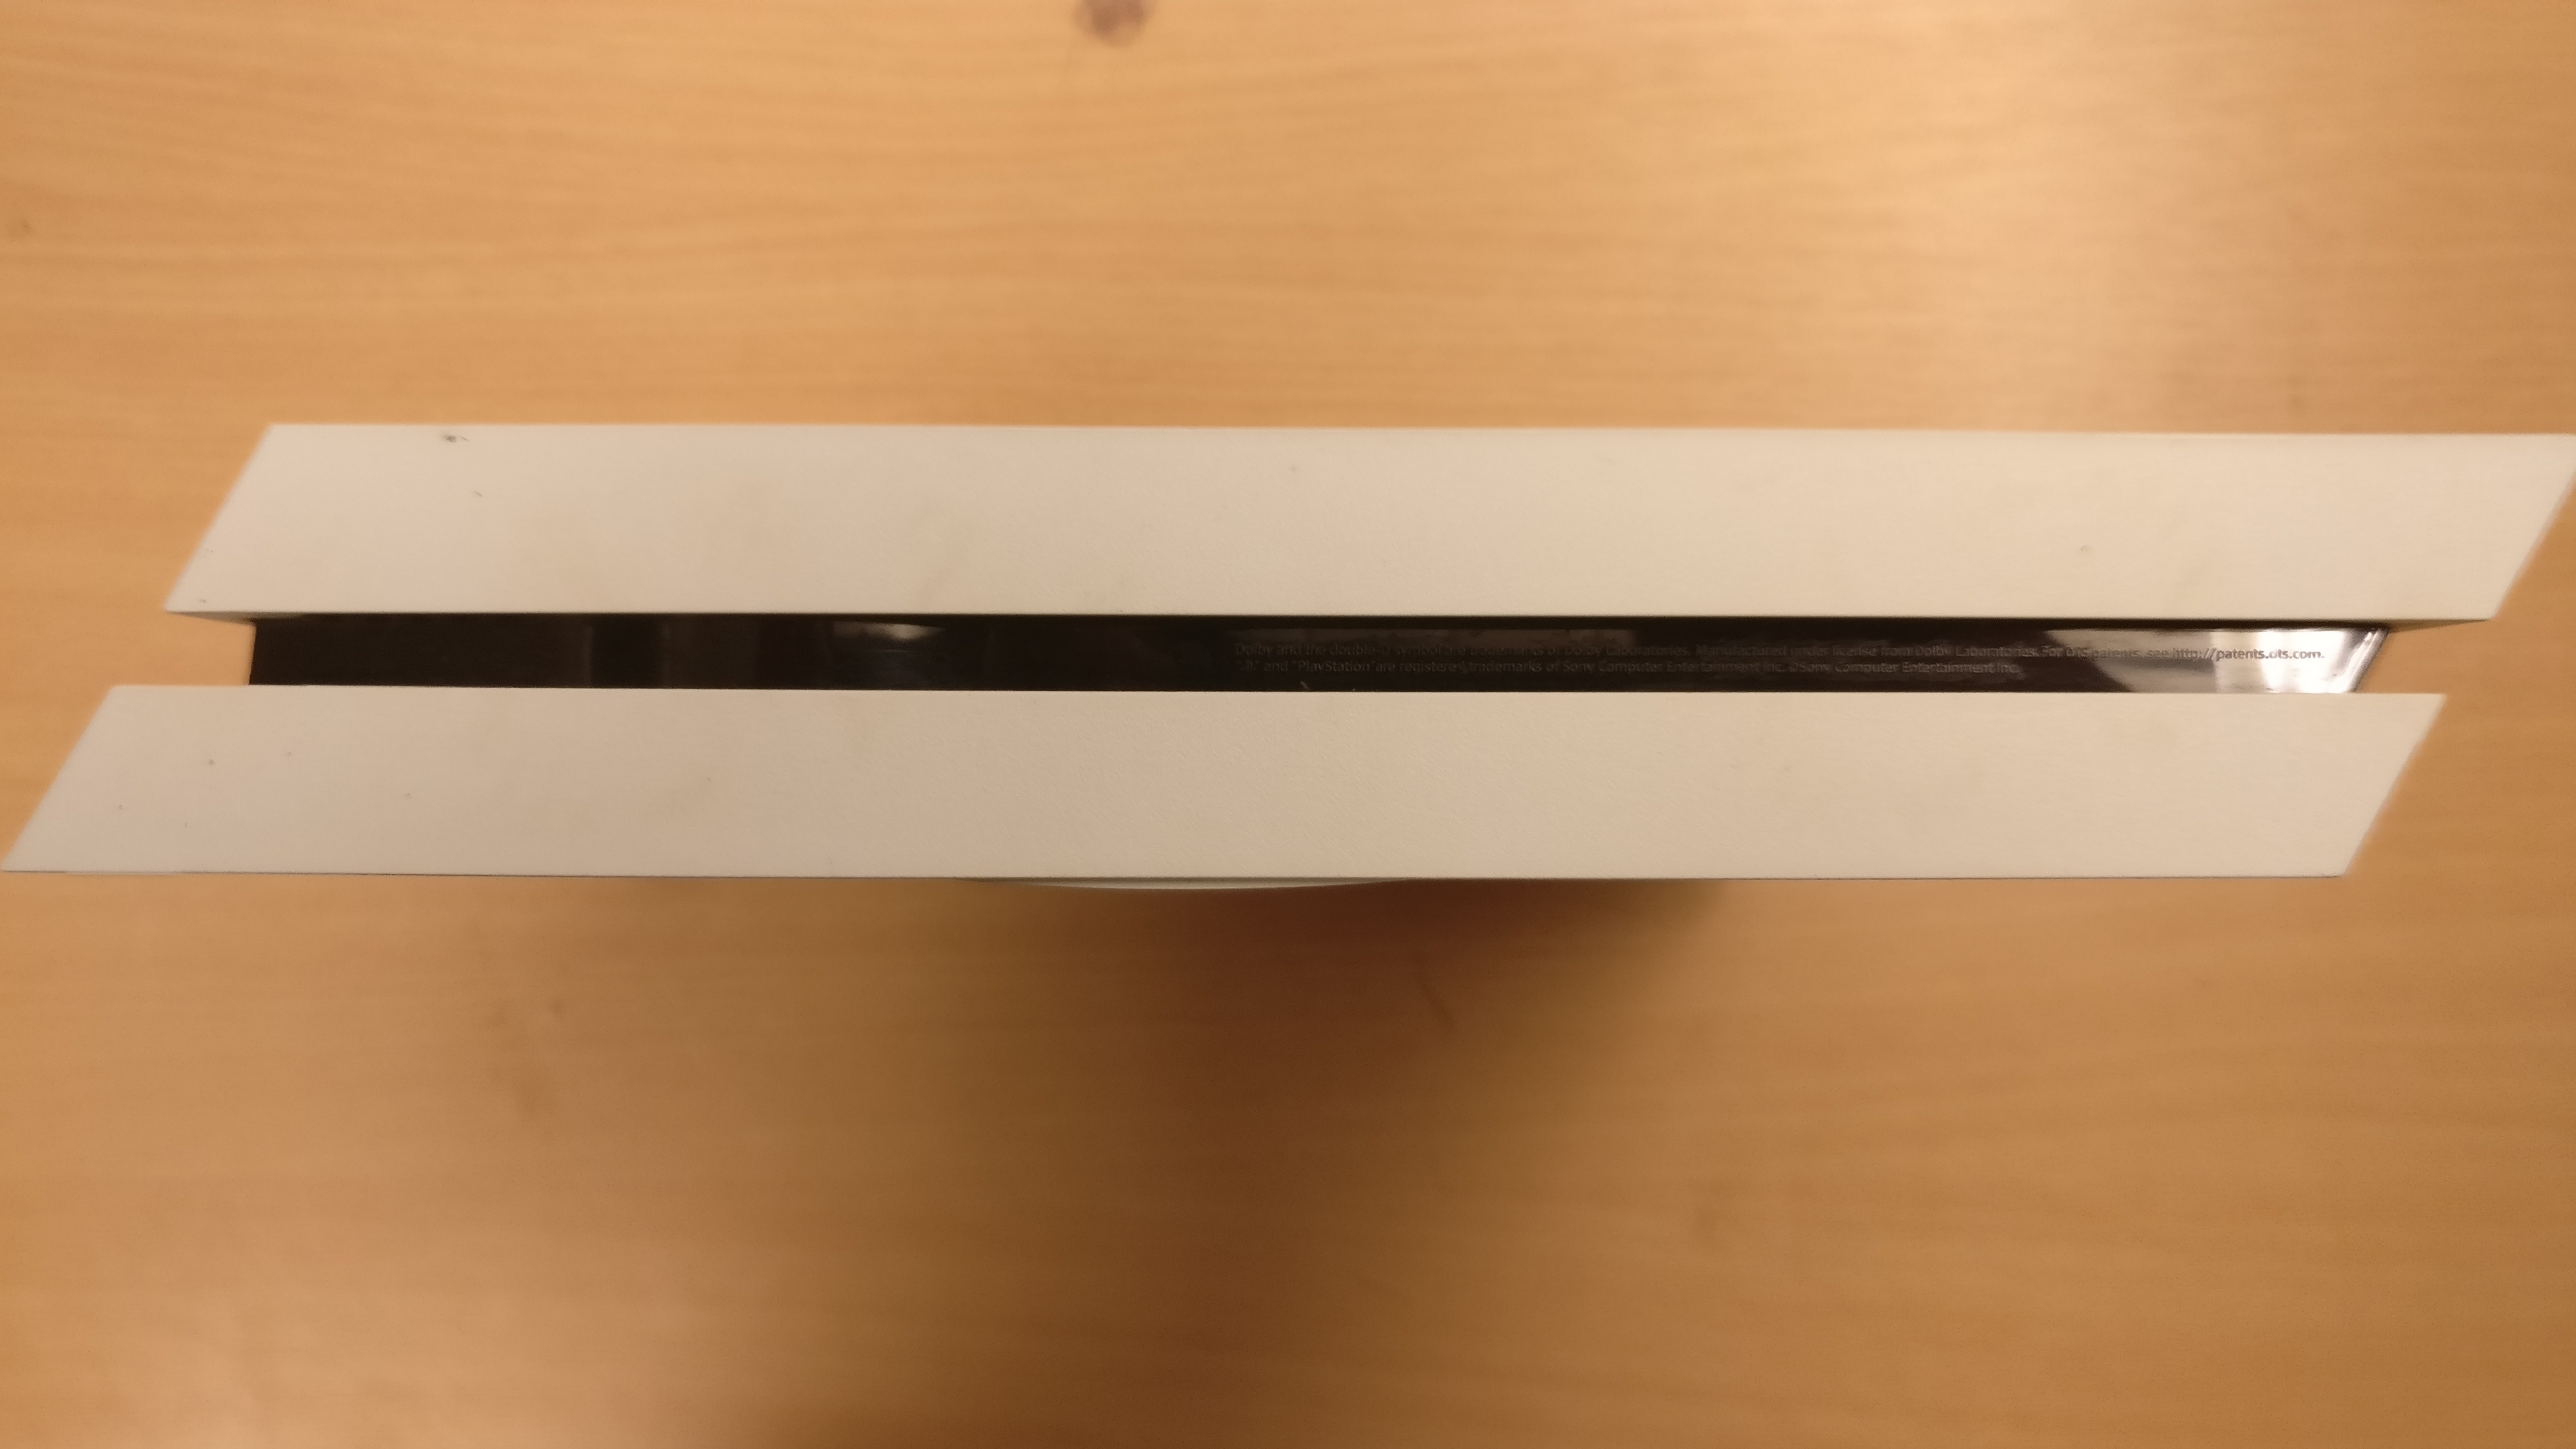 PlayStation 4 Side Panels overheating